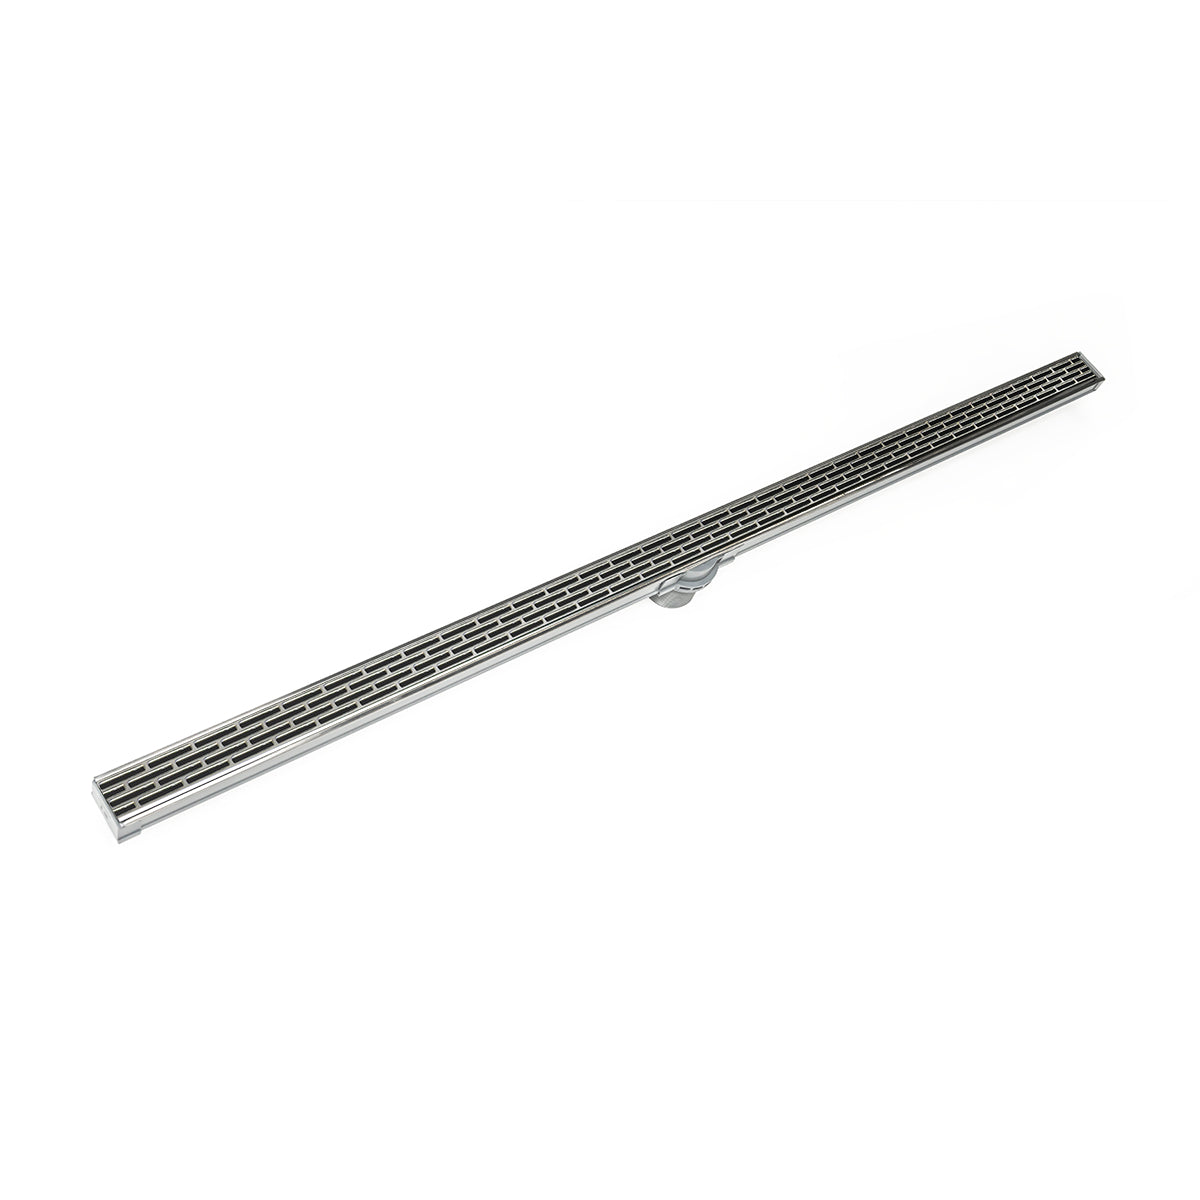 Infinity Drain 72" S-PVC Series Low Profile Site Sizable Linear Drain Kit with 1 1/2" Perforated Offset Slot Grate